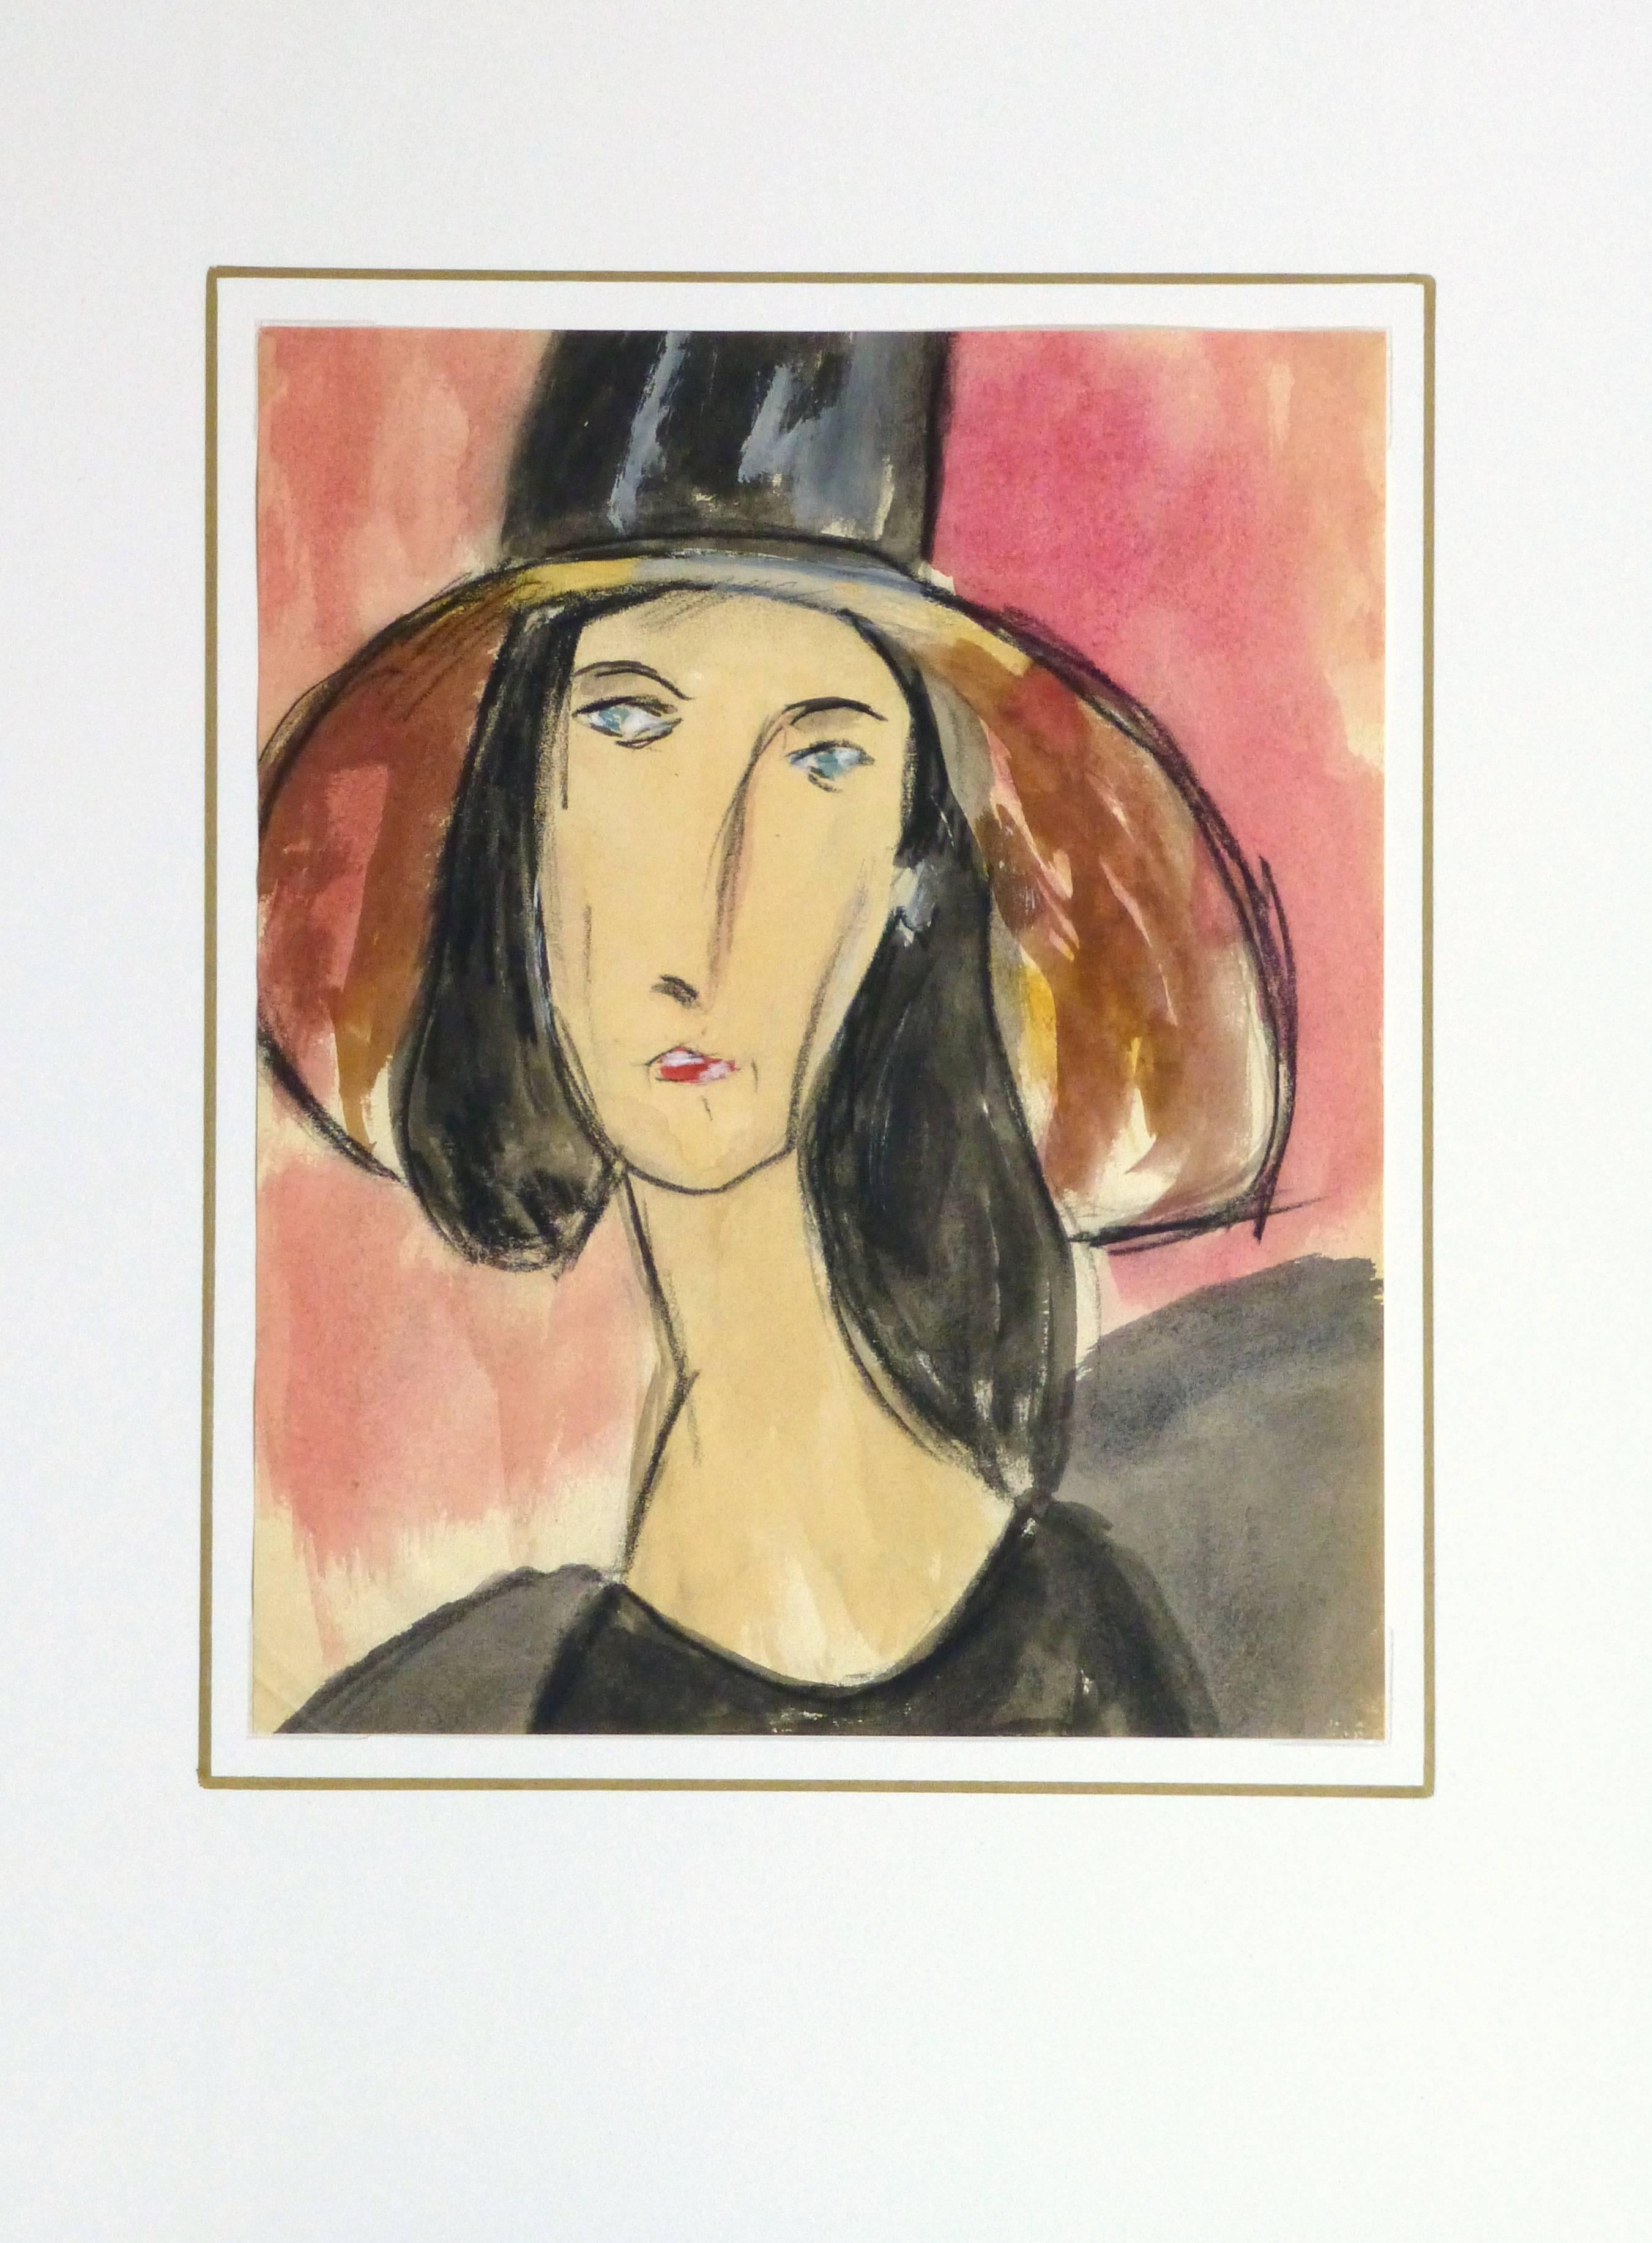 Bright gouache portrait of a raven haired female in a stylish wide brimmed hat, circa 1950.

Original artwork on paper displayed on a white mat with a gold border. Archival plastic sleeve and Certificate of Authenticity included. Artwork, 7.75